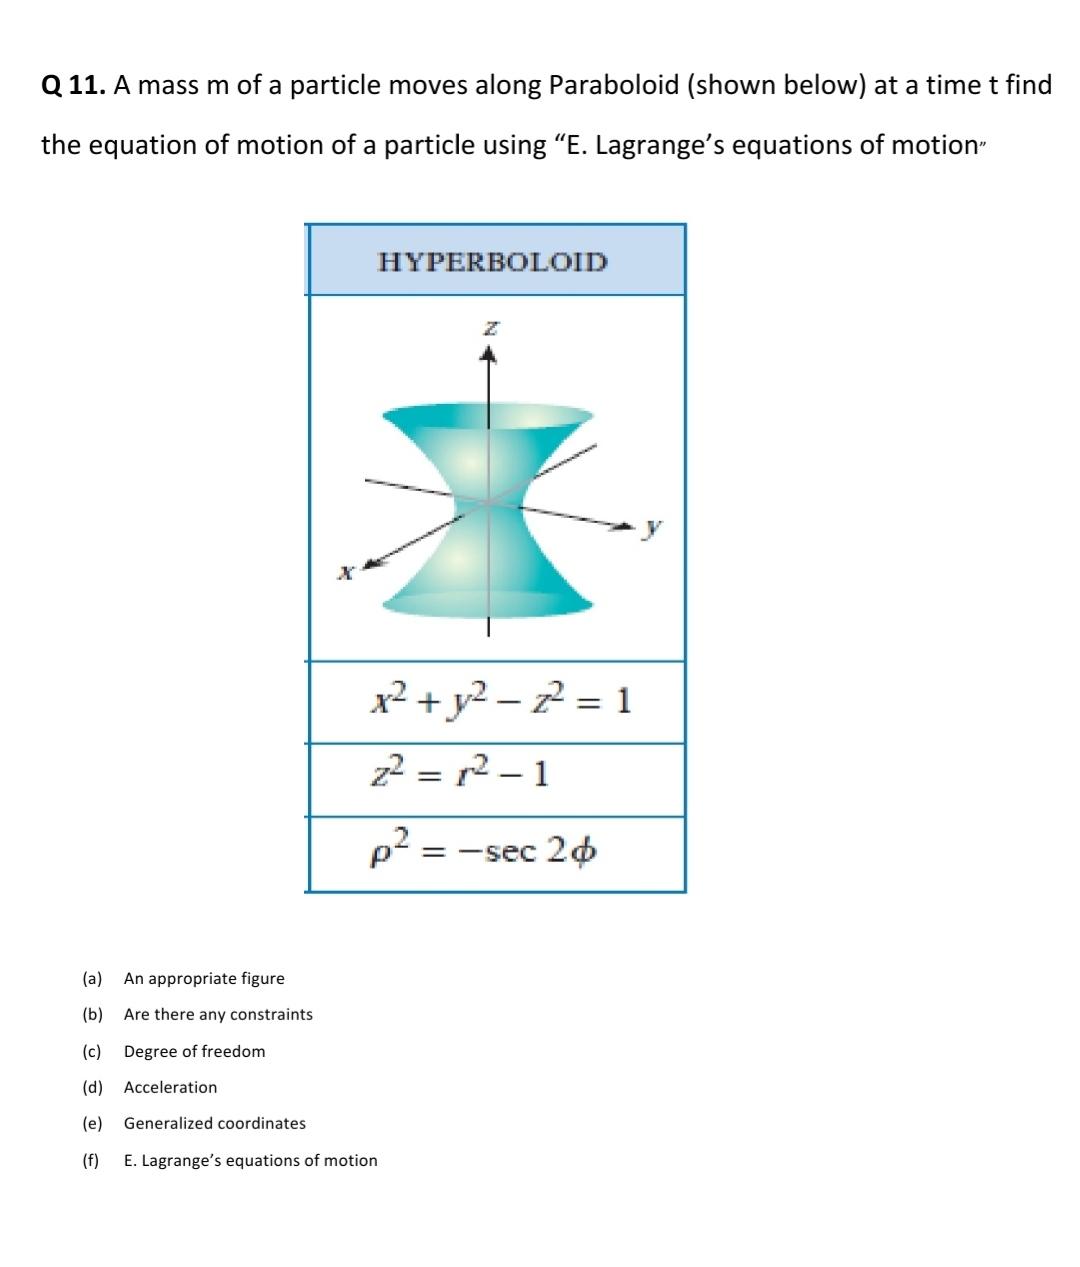 Q 11. A mass m of a particle moves along Paraboloid (shown below) at a time t find the equation of motion of